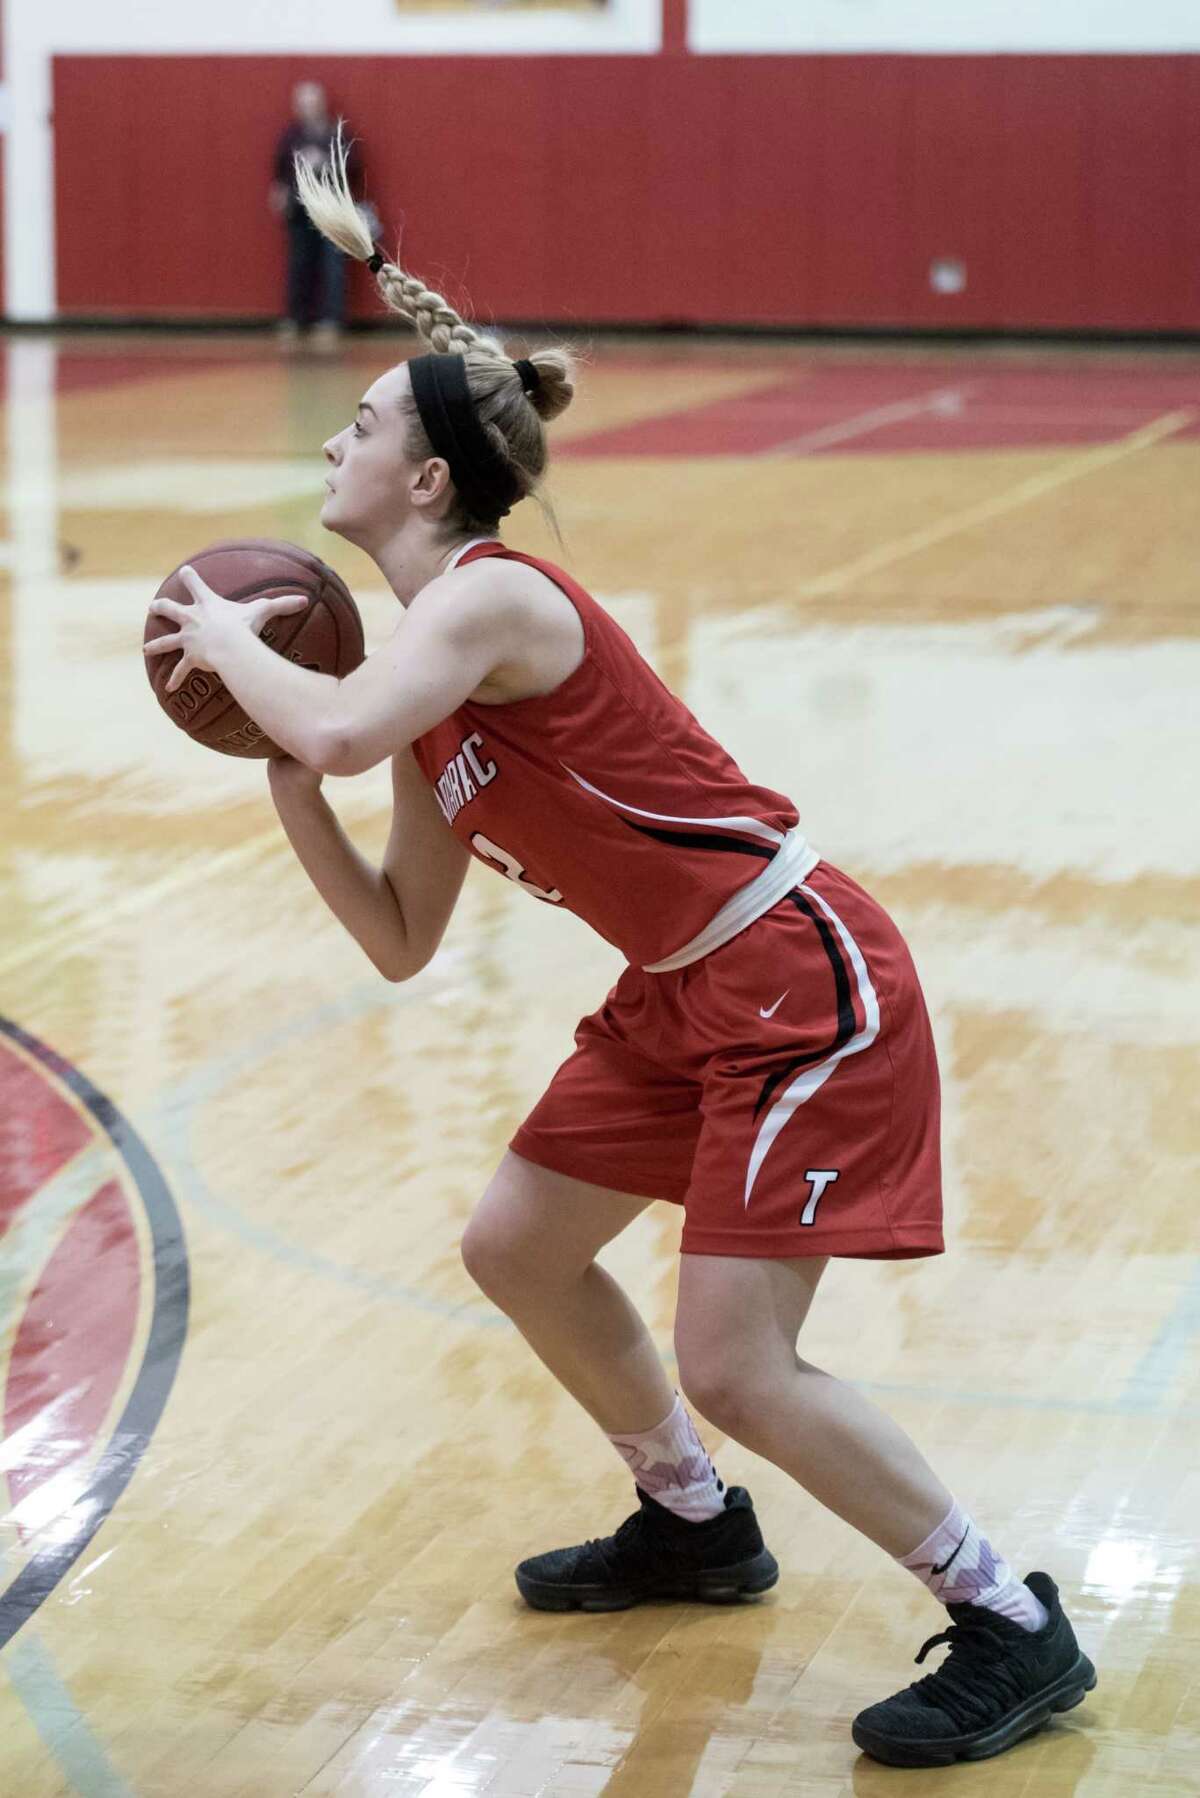 Tamarac's Emily Erickson goes for a basket Friday, December 15th, 2017, during the game against Mechanicville at Mechanicville. Photo By Eric Jenks